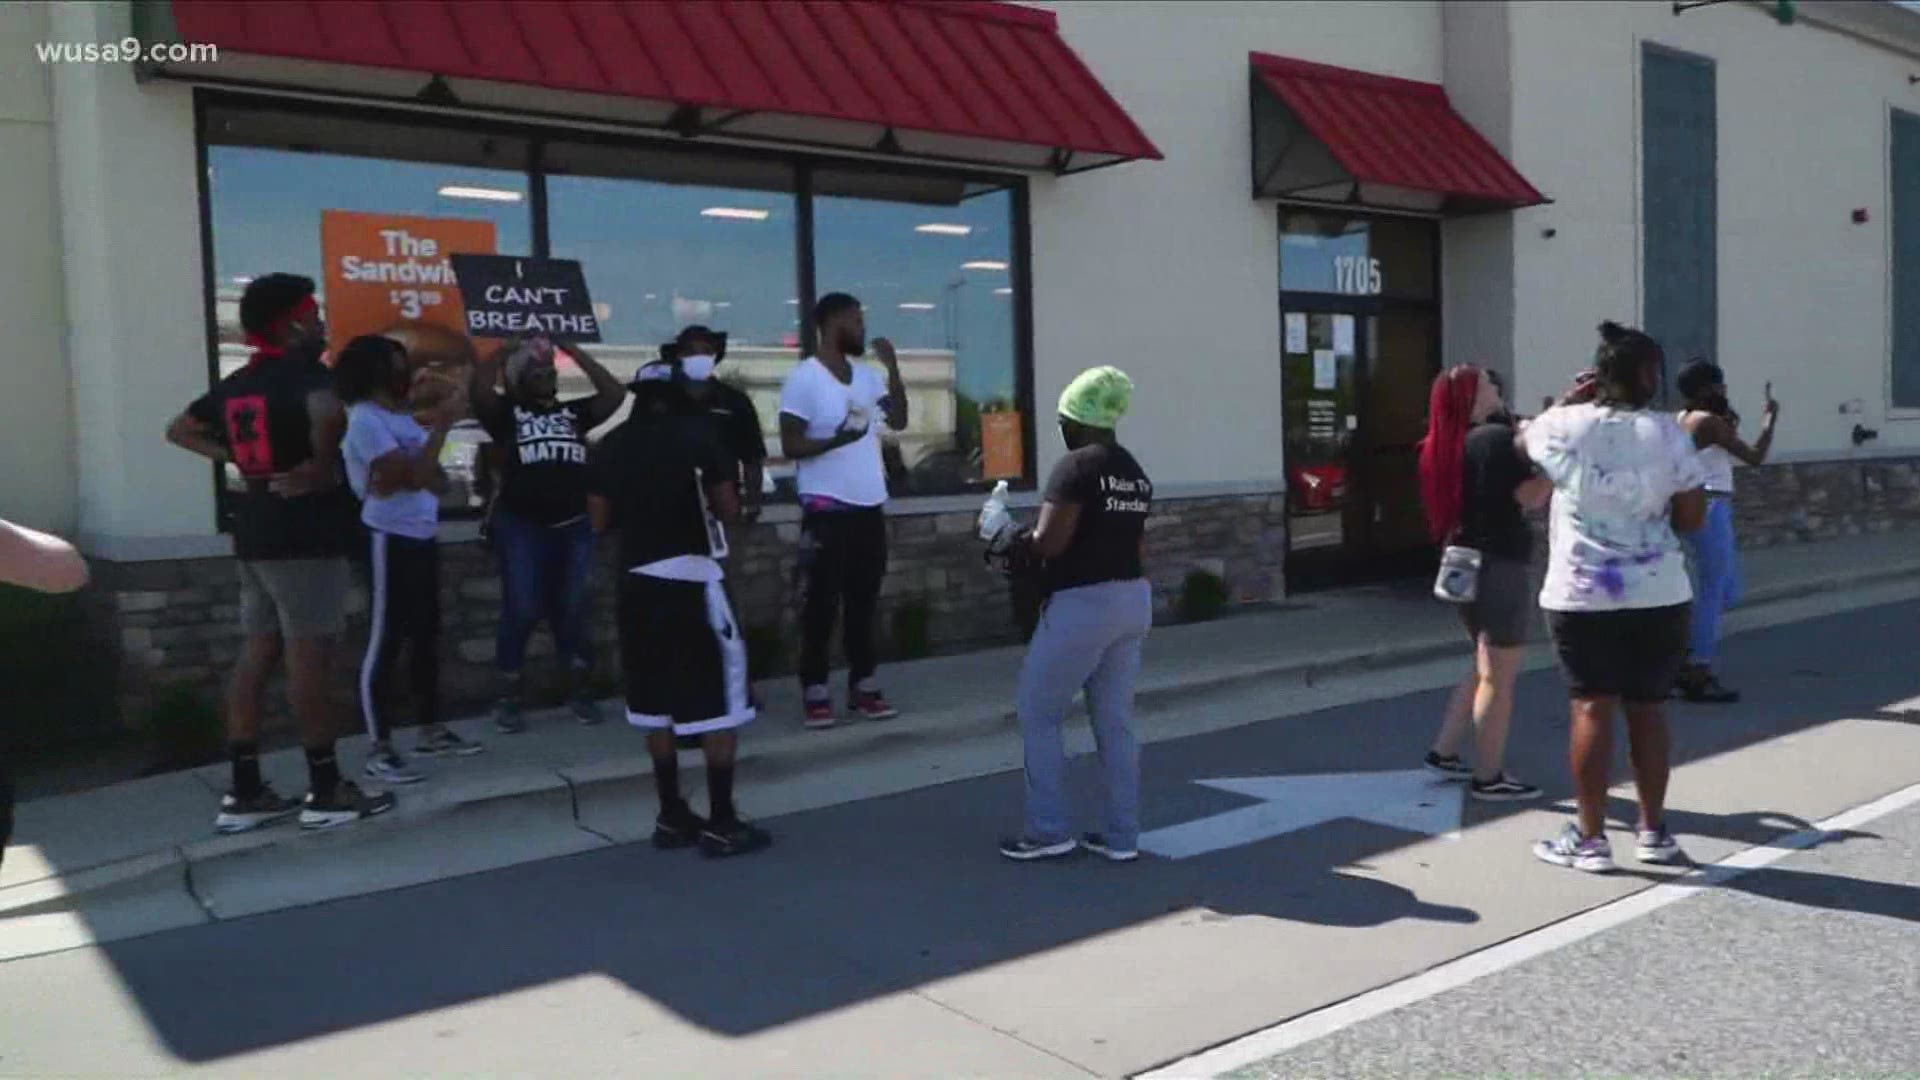 Protesters rally at Popeye’s over viral altercation between woman and security officer